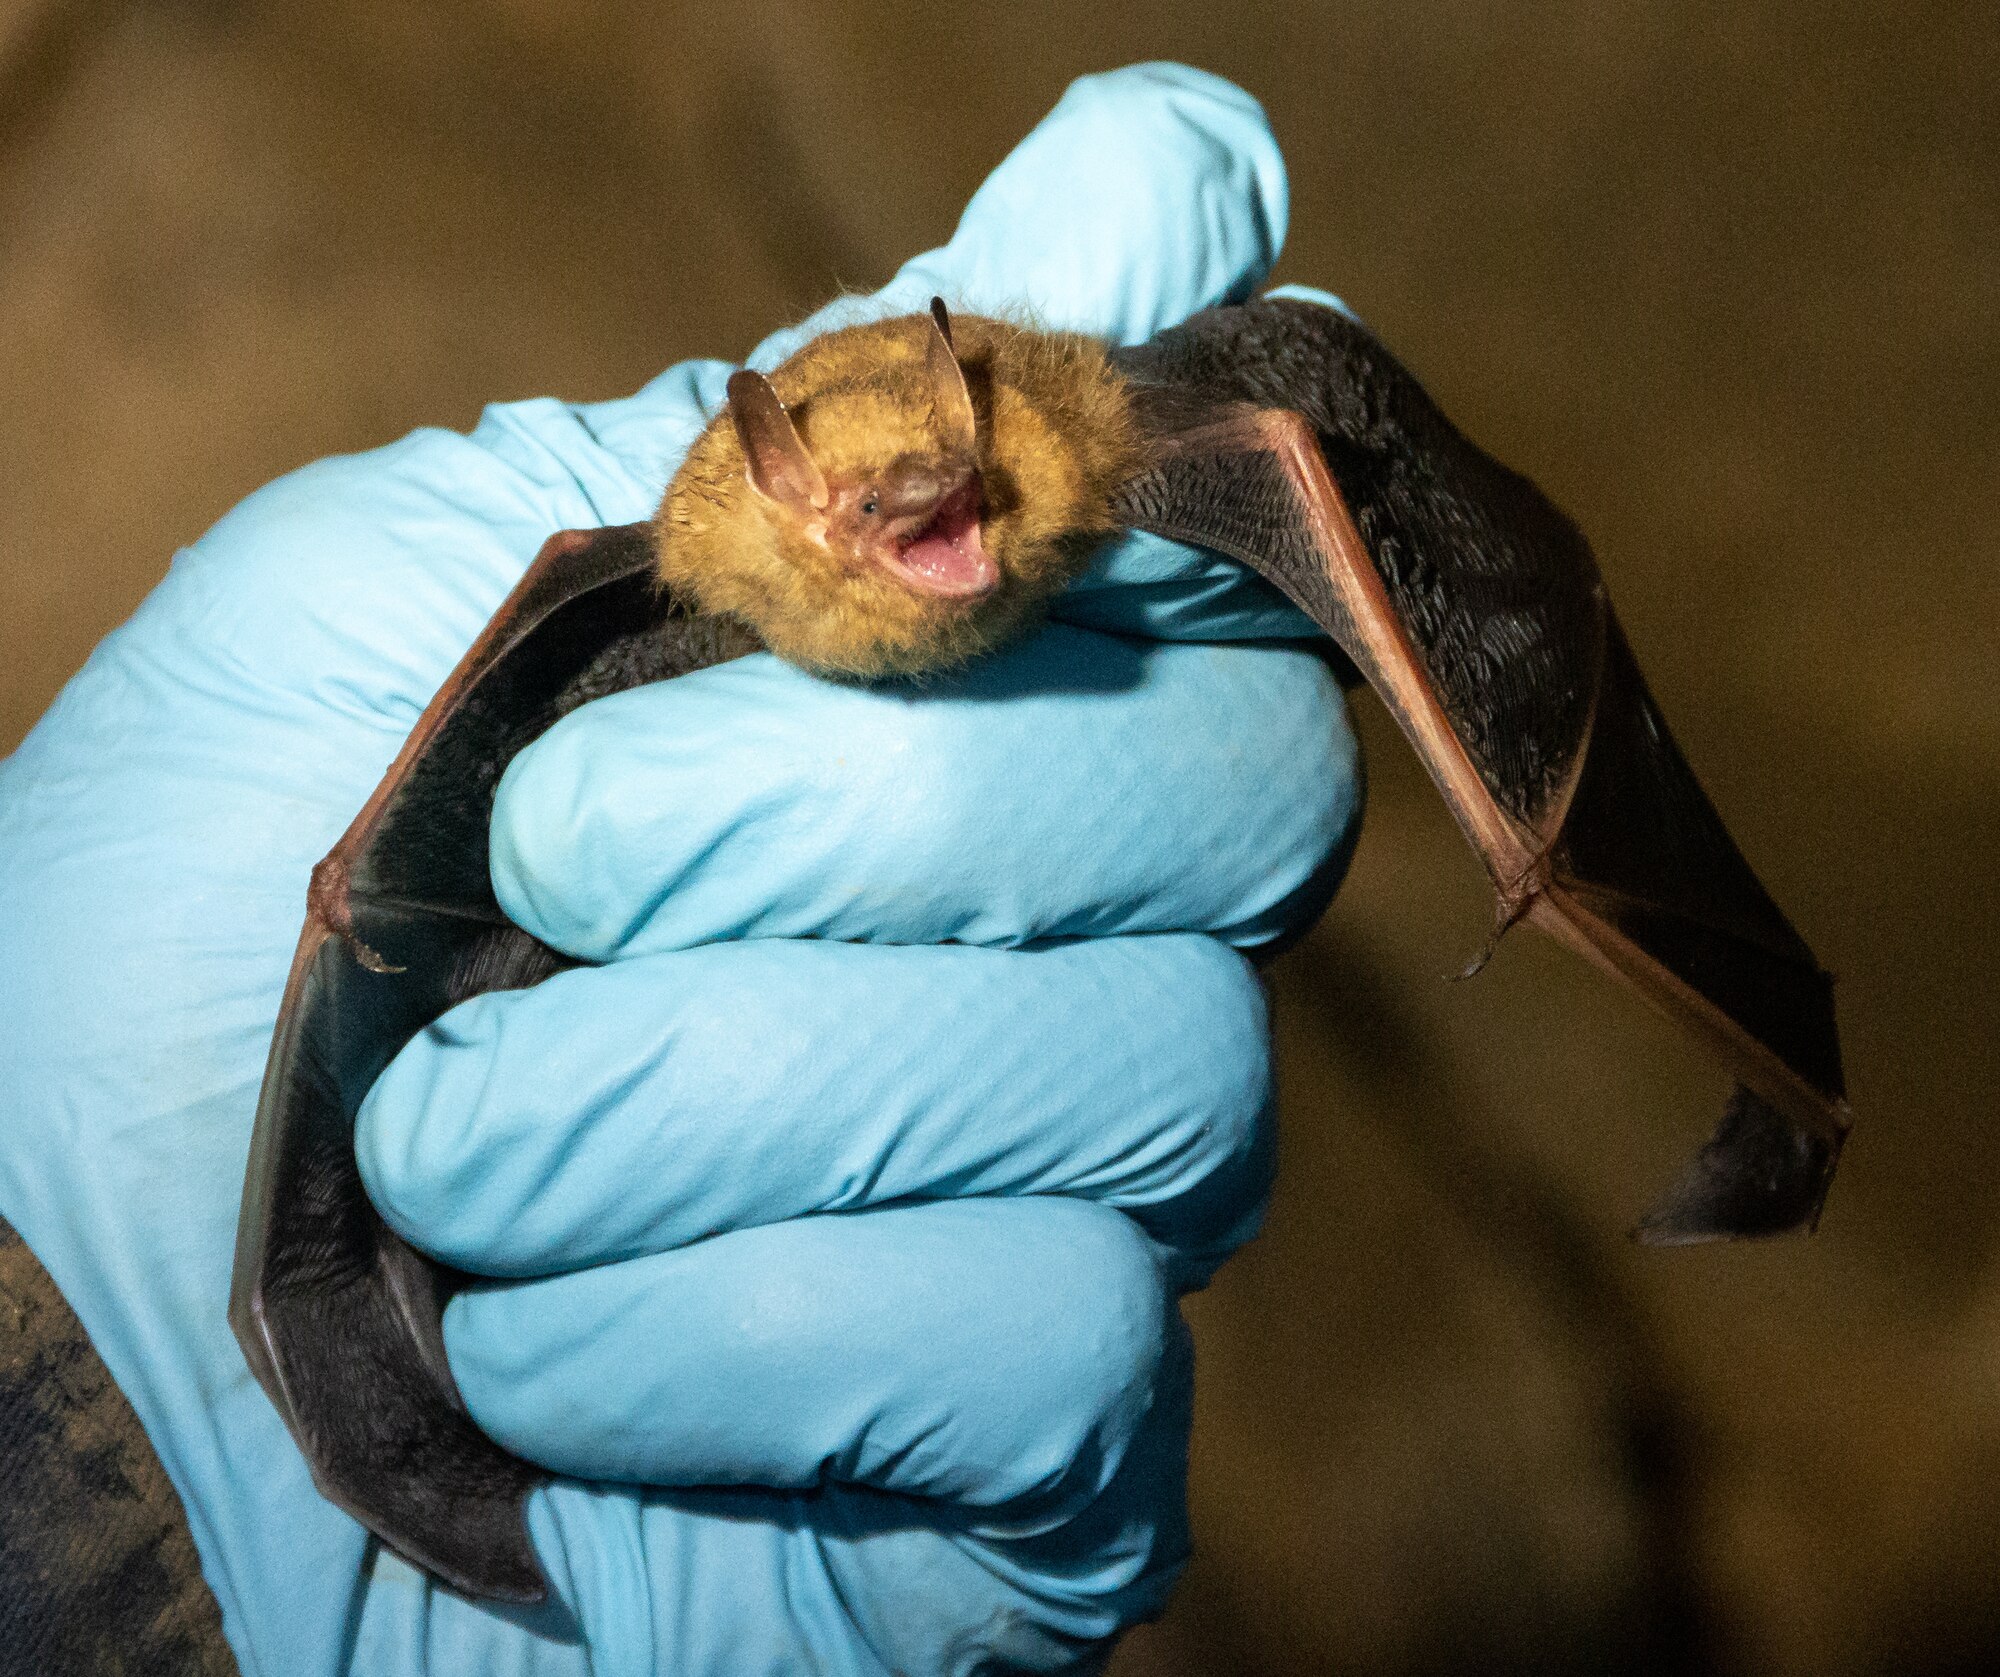 A tricolored bat is ready to be banded before being returned to the area in which it was found in a cave near Arnold Air Force Base, Tenn., Dec. 5, 2022. The bands allow researchers to identify the bat if it is recaptured on a subsequent trip into the cave. Team members at Arnold AFB conduct summer and winter bat surveys across the installation. Information gathered from such surveys supports existing knowledge of populations and provides a long-term view of what is occurring population-wise with a particular species or community, which helps the base Natural Resource team make informed decisions. (U.S. Air Force photo)